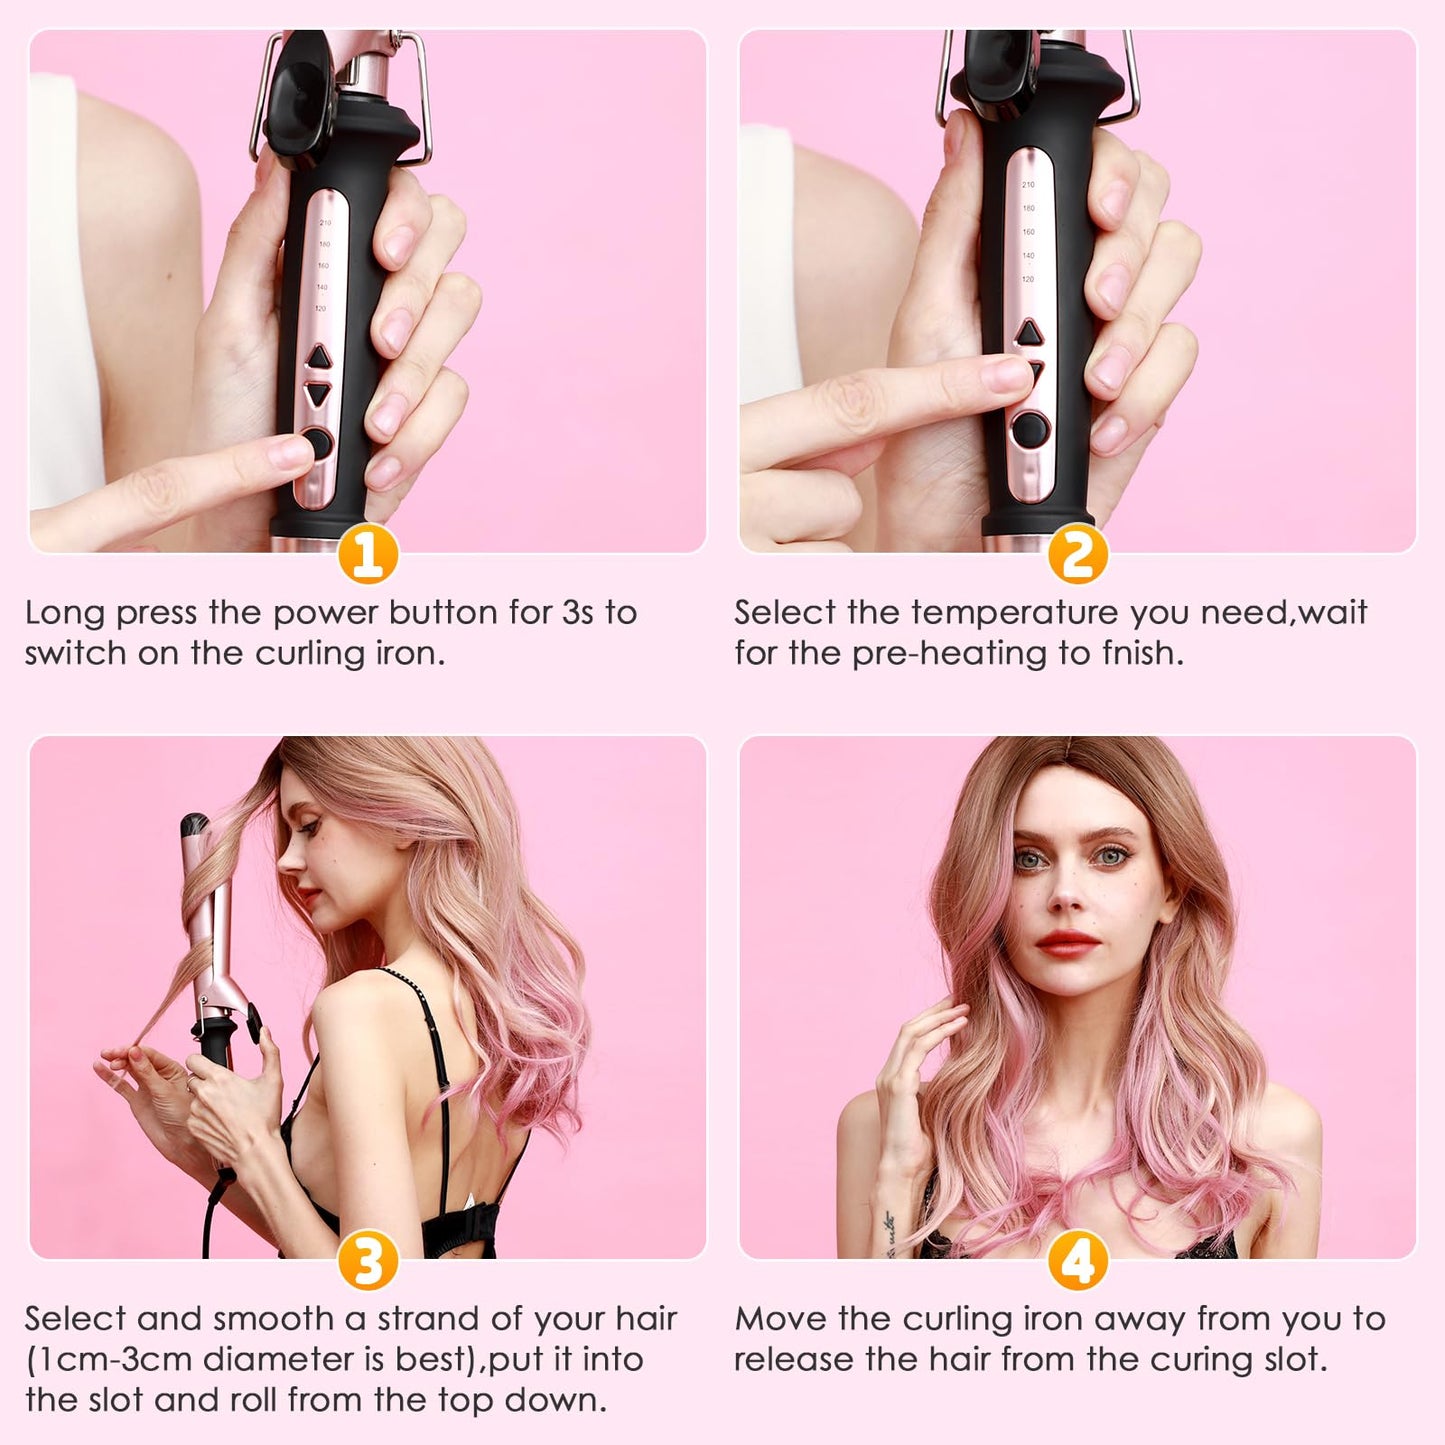 1.25 Inch Curling Iron Curling Wand Ceramic Barrel Curling Iron Dual Voltage Hair Crimper with Adjustable Temperature, 1-1/4″ Clipped Curling Iron for Natural Curls Hair Waving Style Tool -Gold